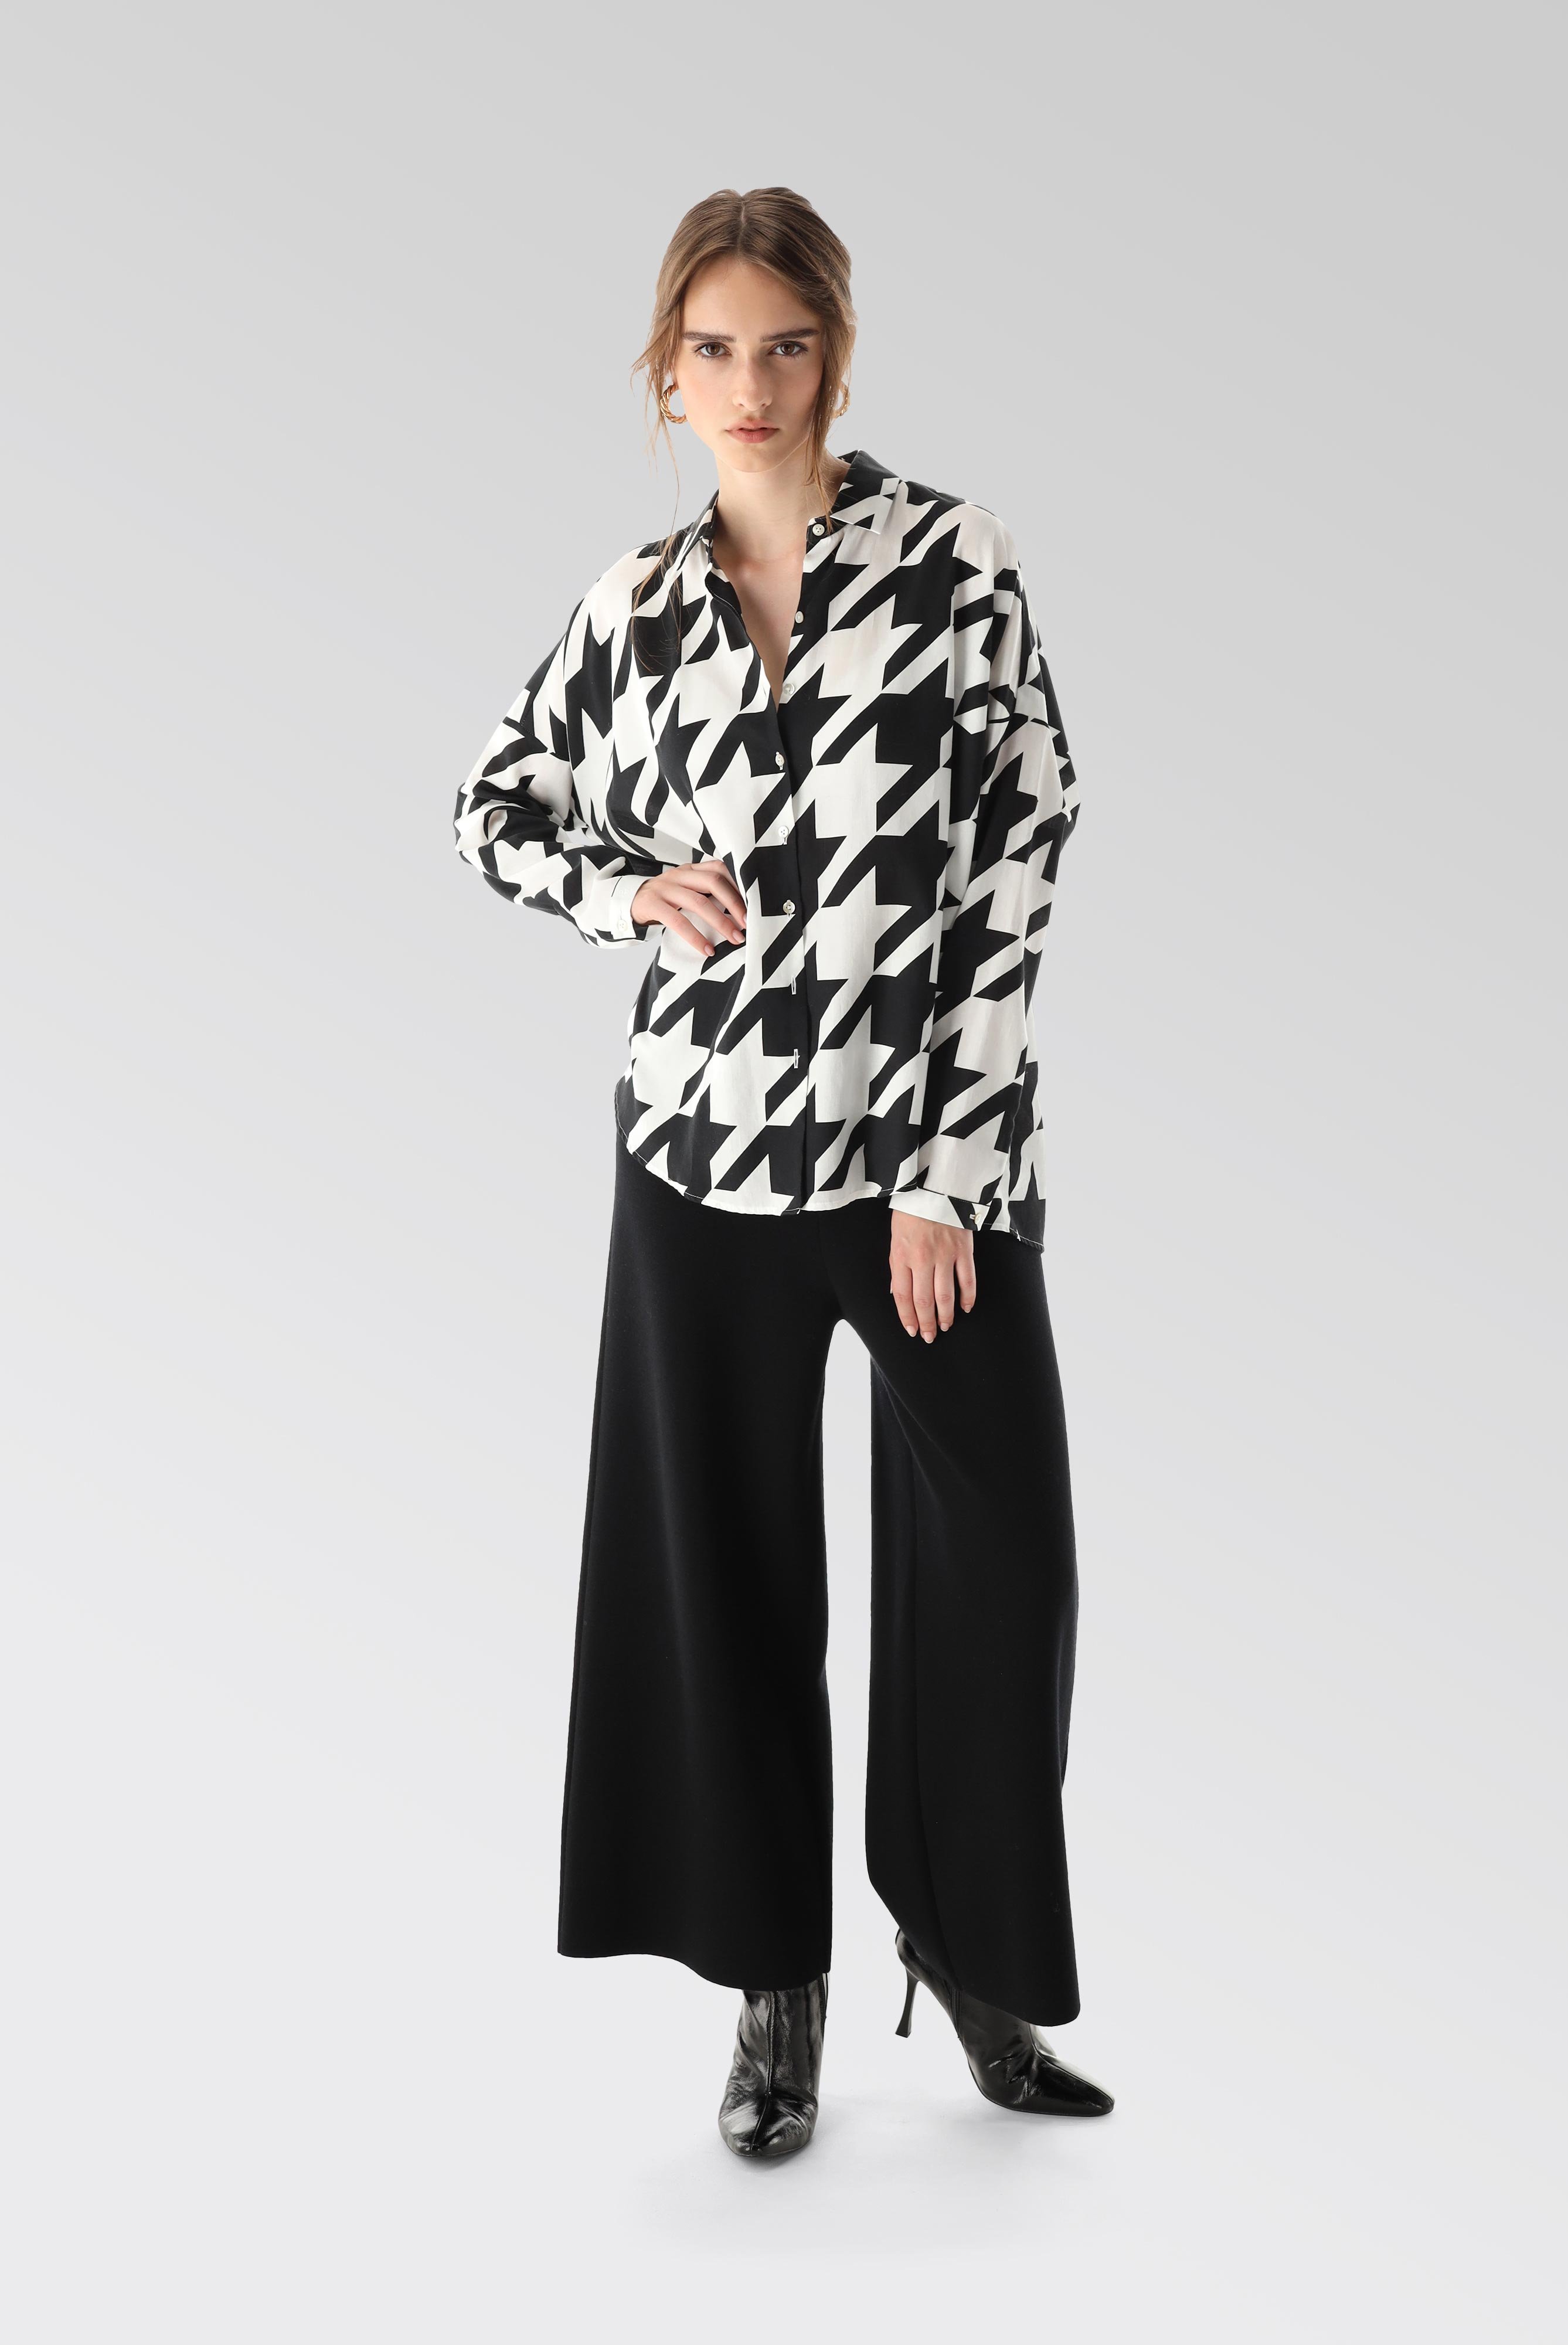 Casual Blouses+Satin Shirt with a Houndsttoth Print+05.527Z.07.172148.091.34